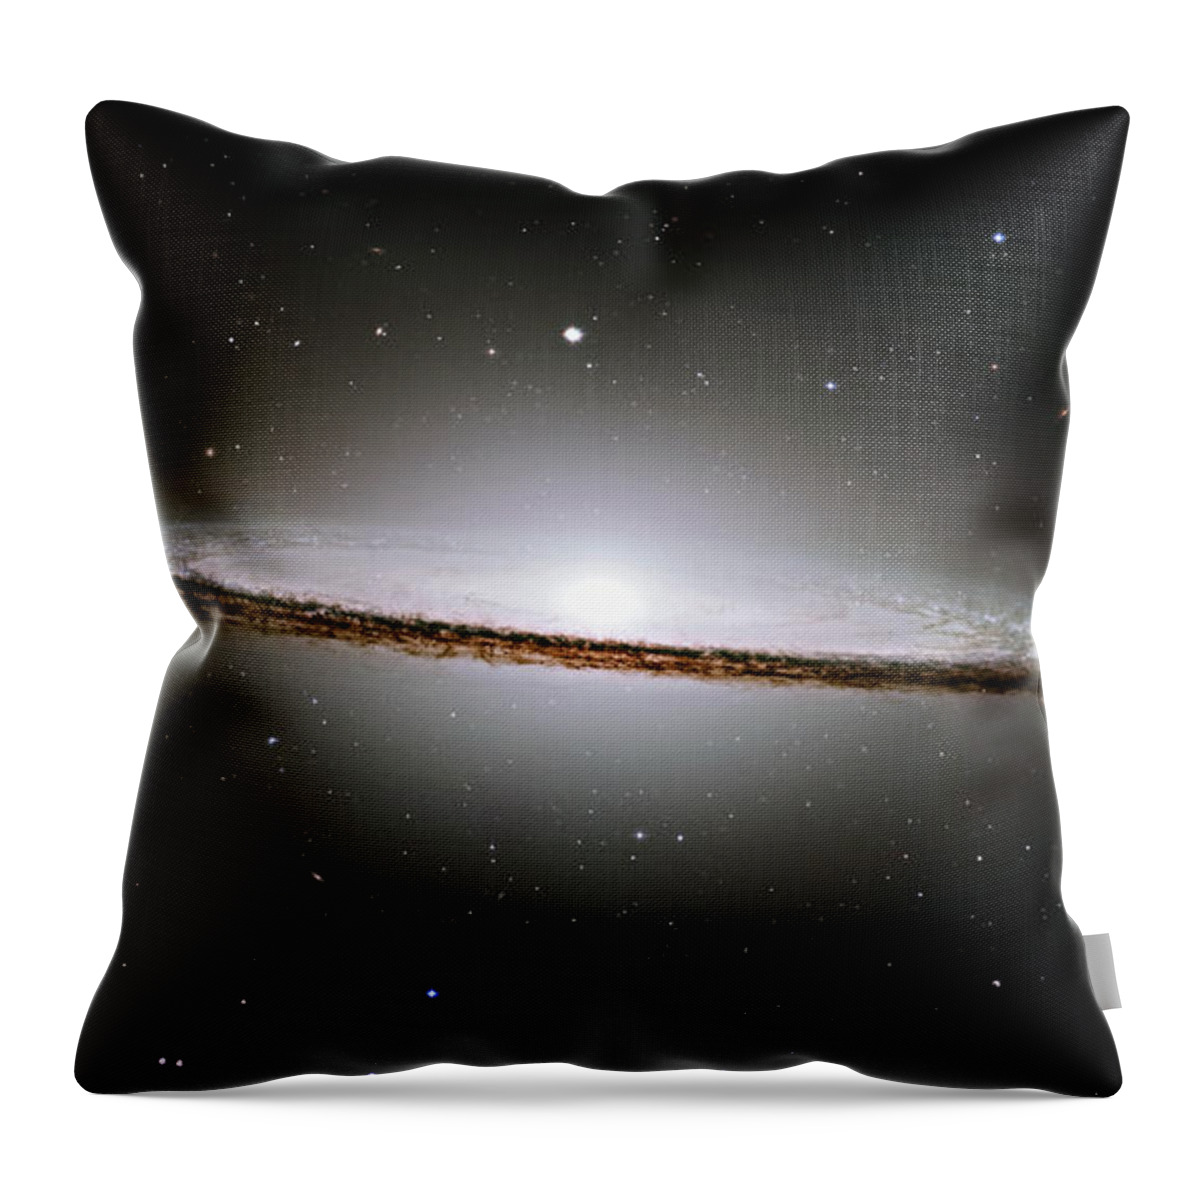 M104 Throw Pillow featuring the photograph The Majestic Sombrero Galaxy by Ricky Barnard